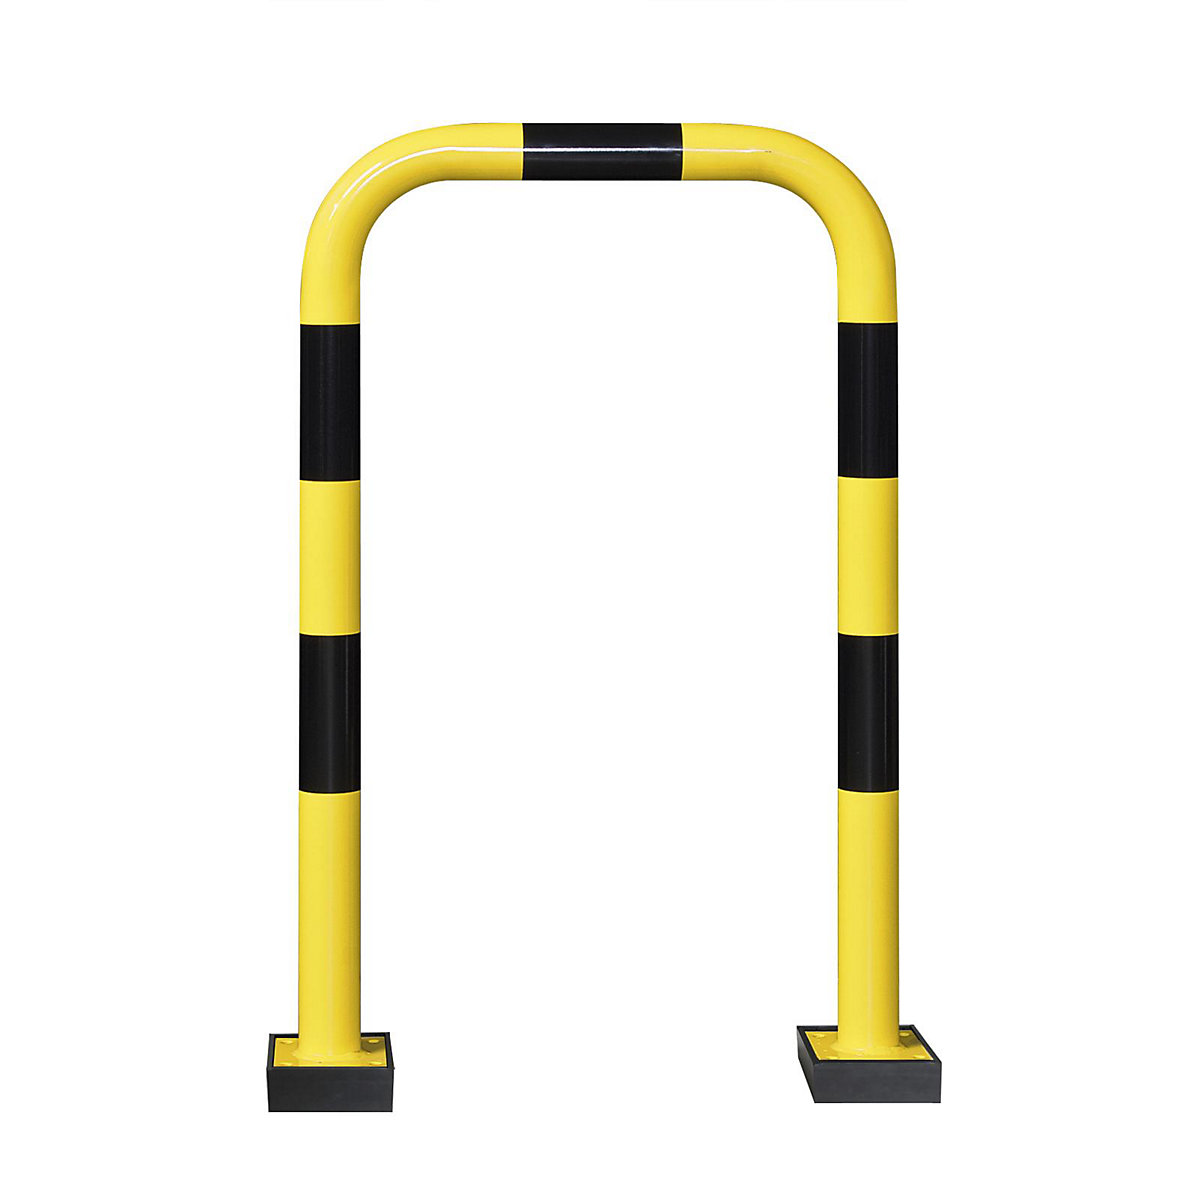 Crash protection bar, flexible, for outdoor use, HxW 1240 x 750 mm